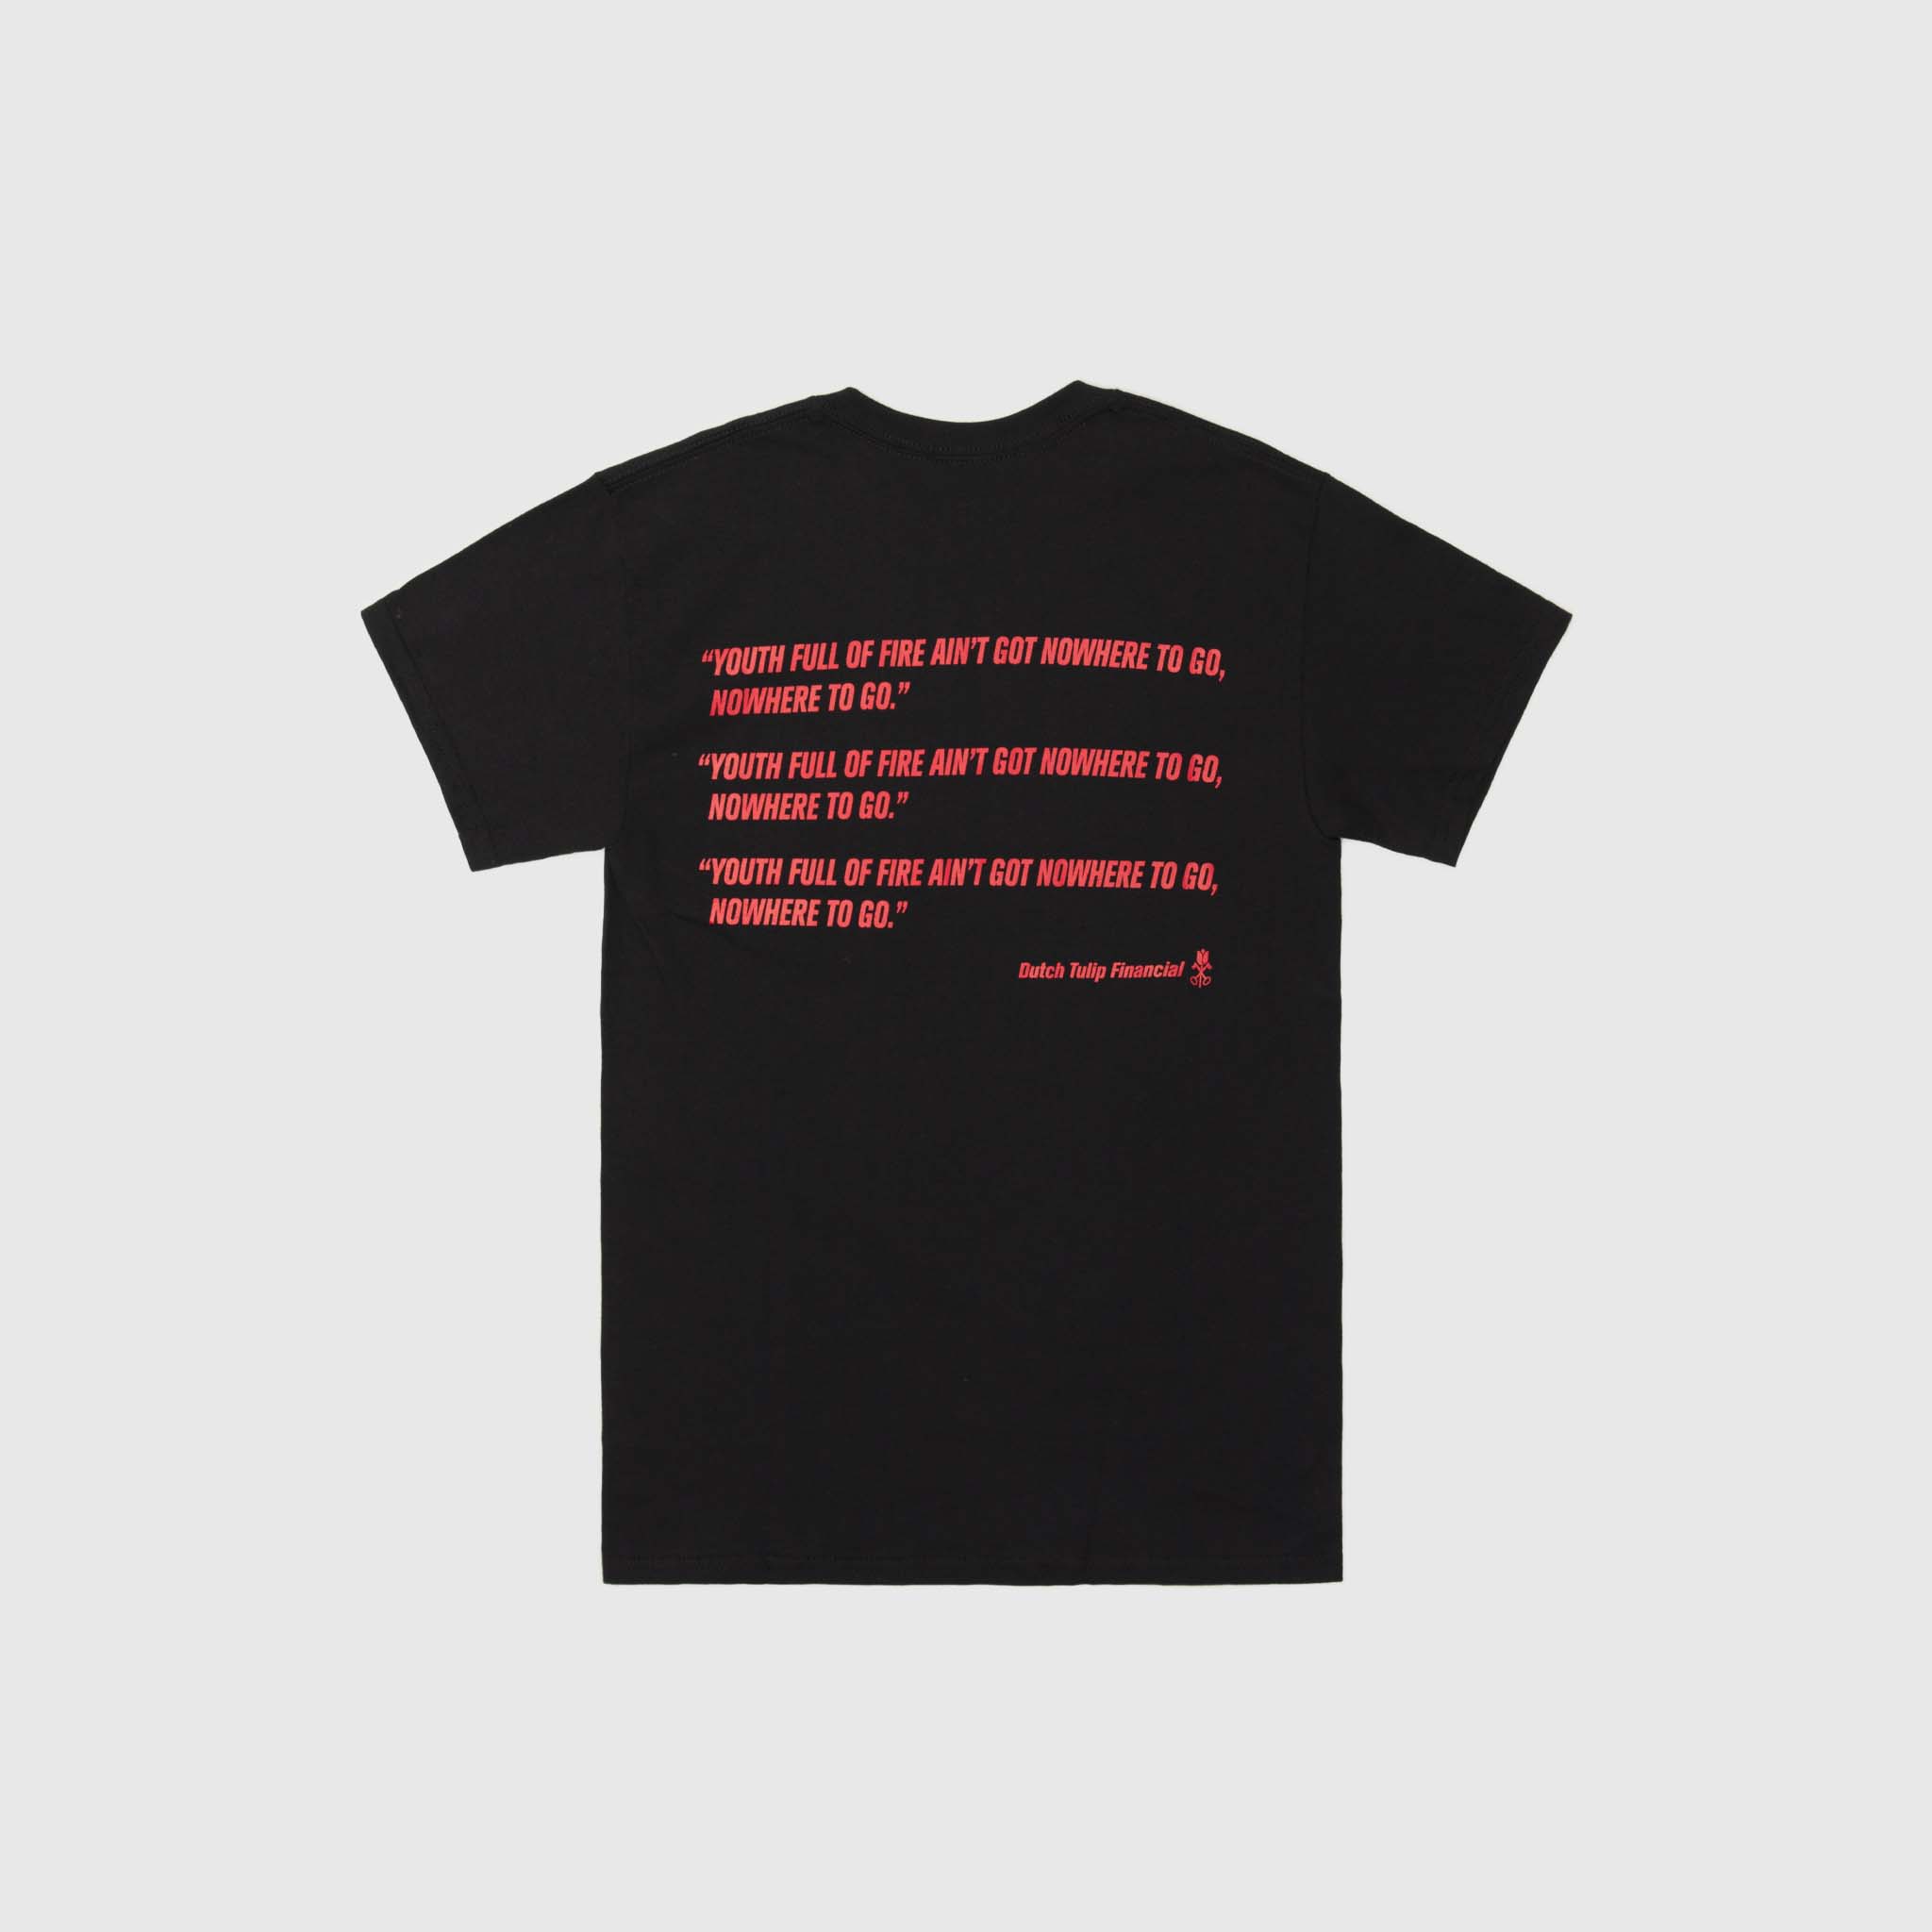 HELL GASOLINE DREAMS S/S T-SHIRT